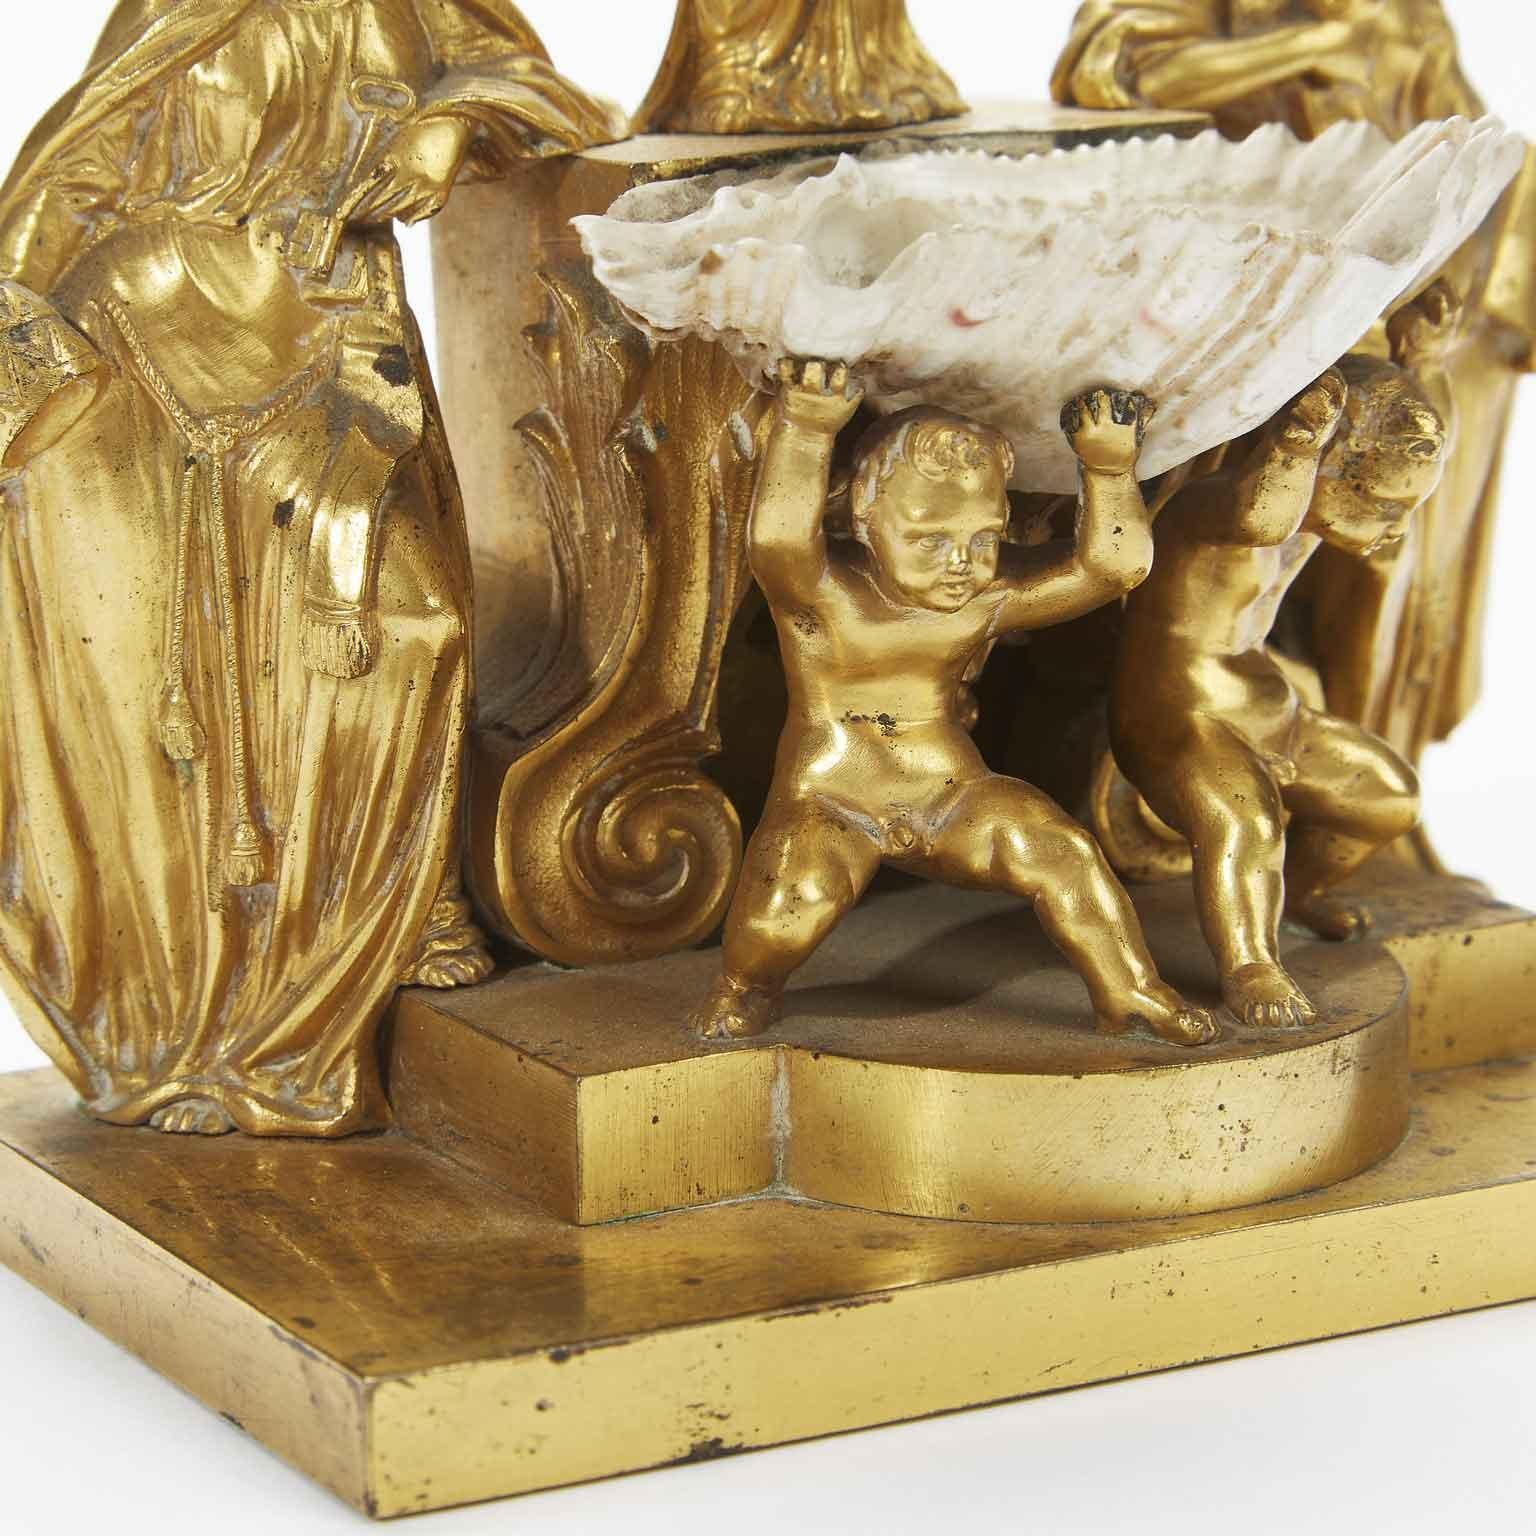 Neoclassical 19th Century Italian Gilded Holy Water Font with Putti Angel Saints and Shell